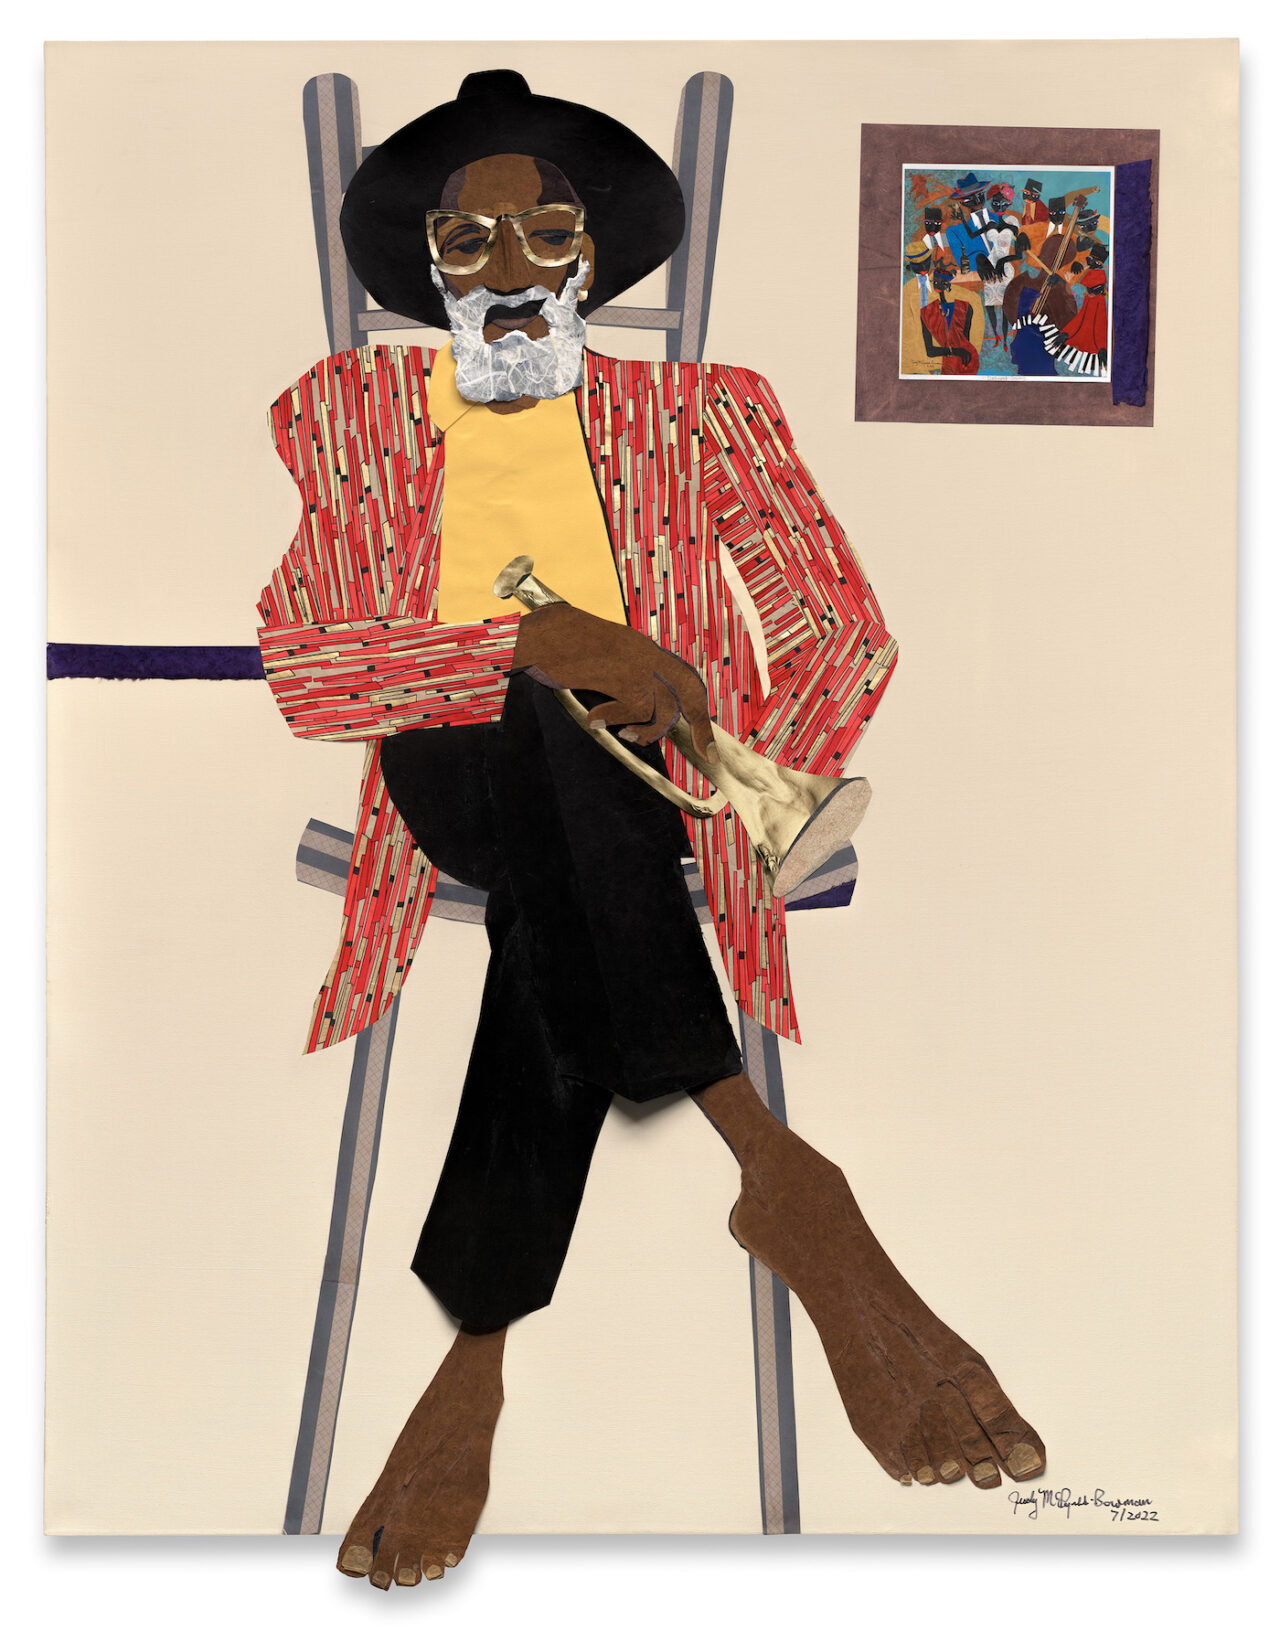 Judy Bowman, Relaxing With Me Blues, 2022. Mixed
media collage on canvas 60 x 48
in 152.4 x 121.9 cm. Image courtesy the
artist and Museum of Contemporary Art Detroit